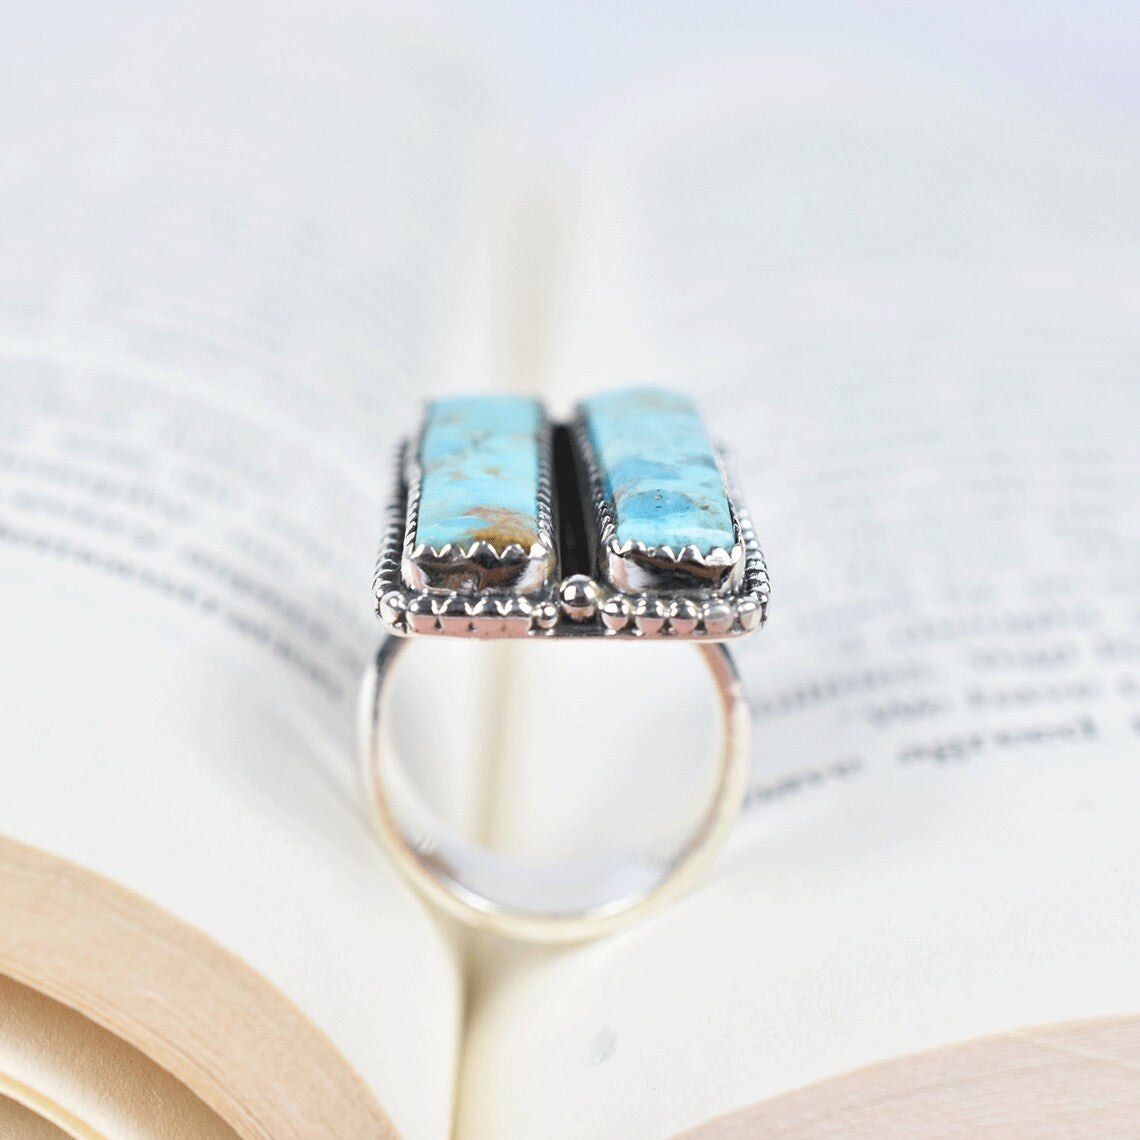 Vintage Two Stone Rectangle Turquoise Southwestern Style Ring - 925 Sterling Silver Rings